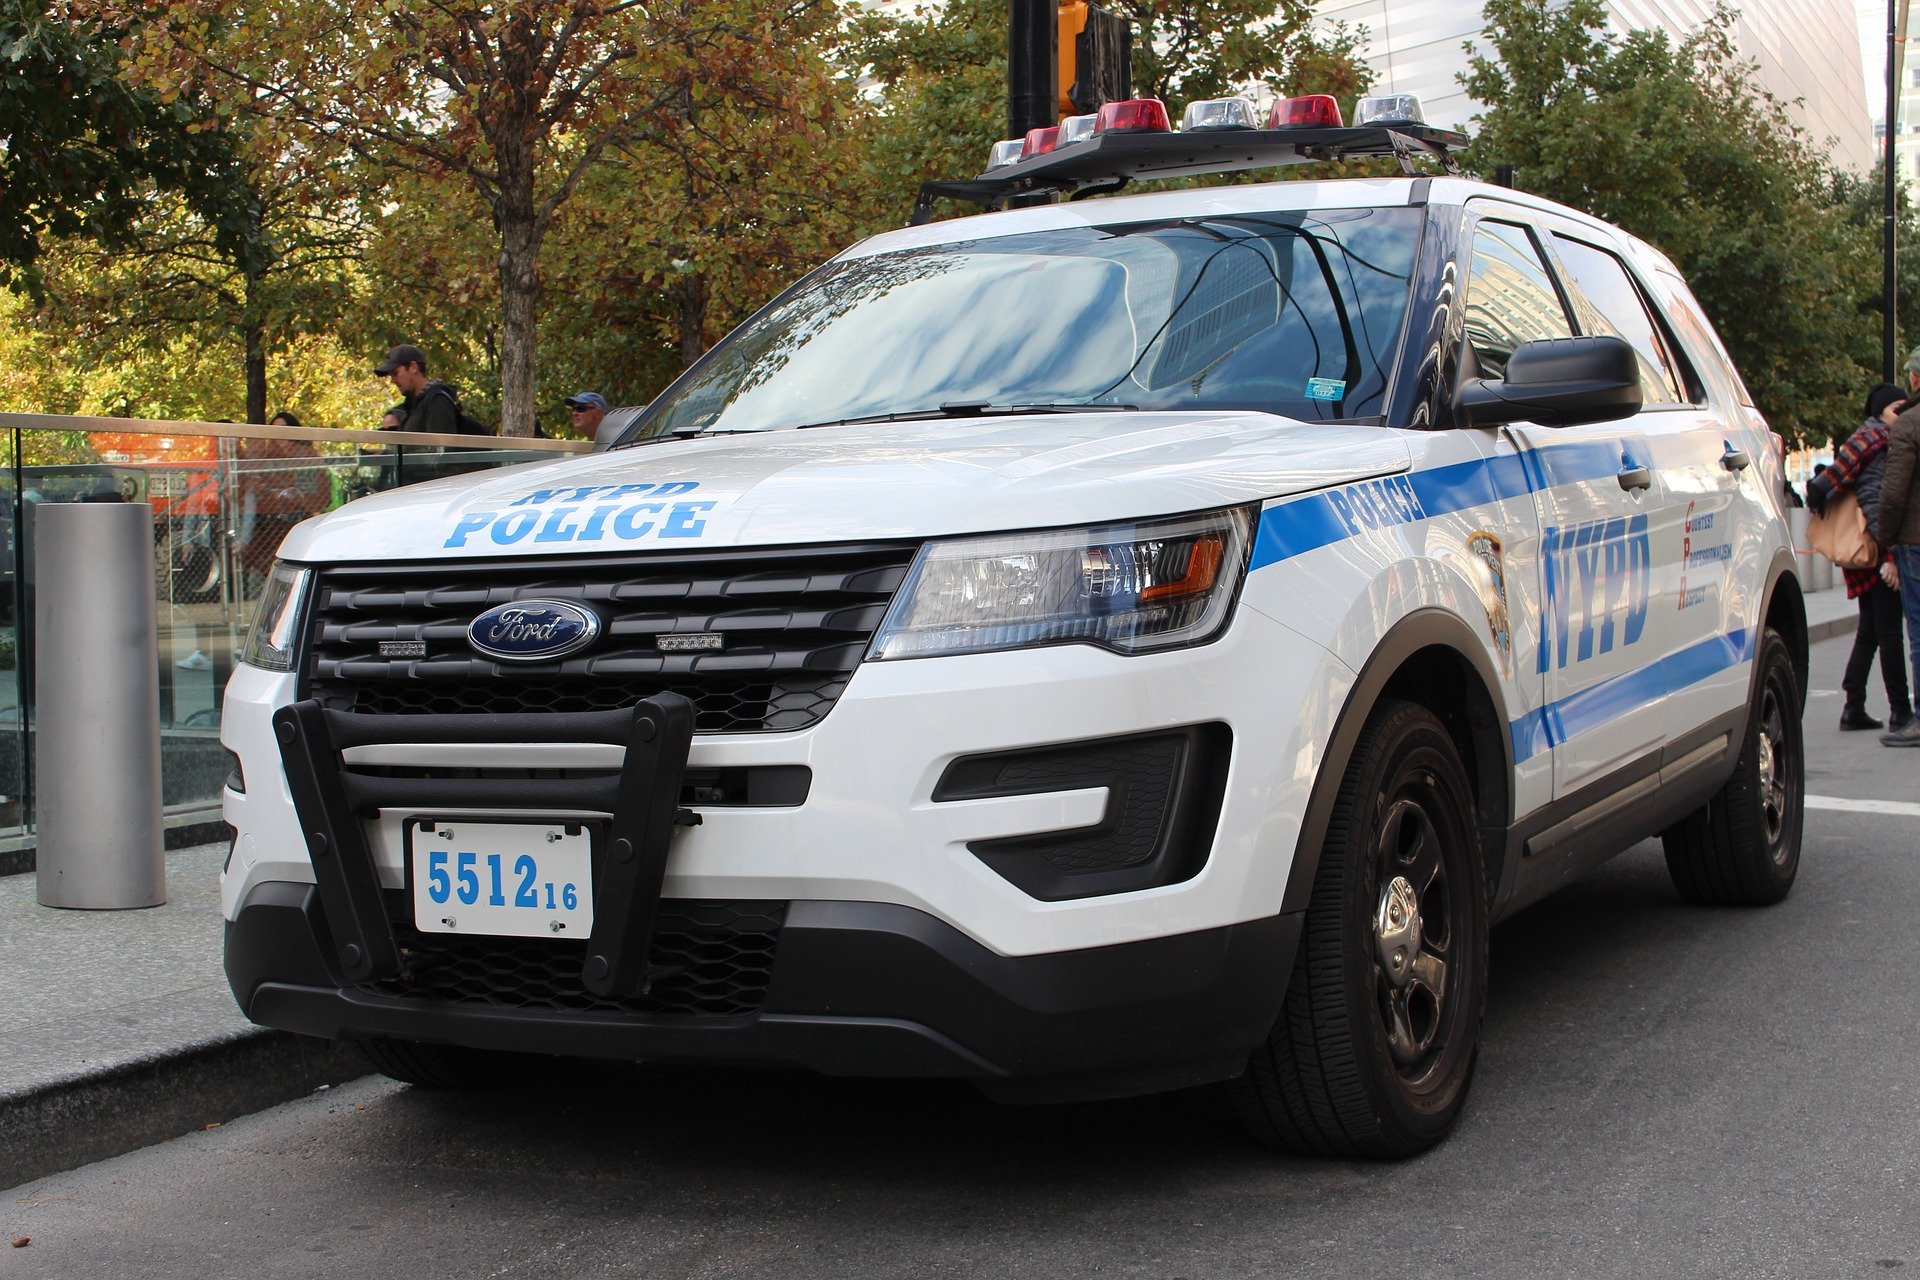 New York City Police Department vehicle at the scene of a crime. | Source: Pixabay